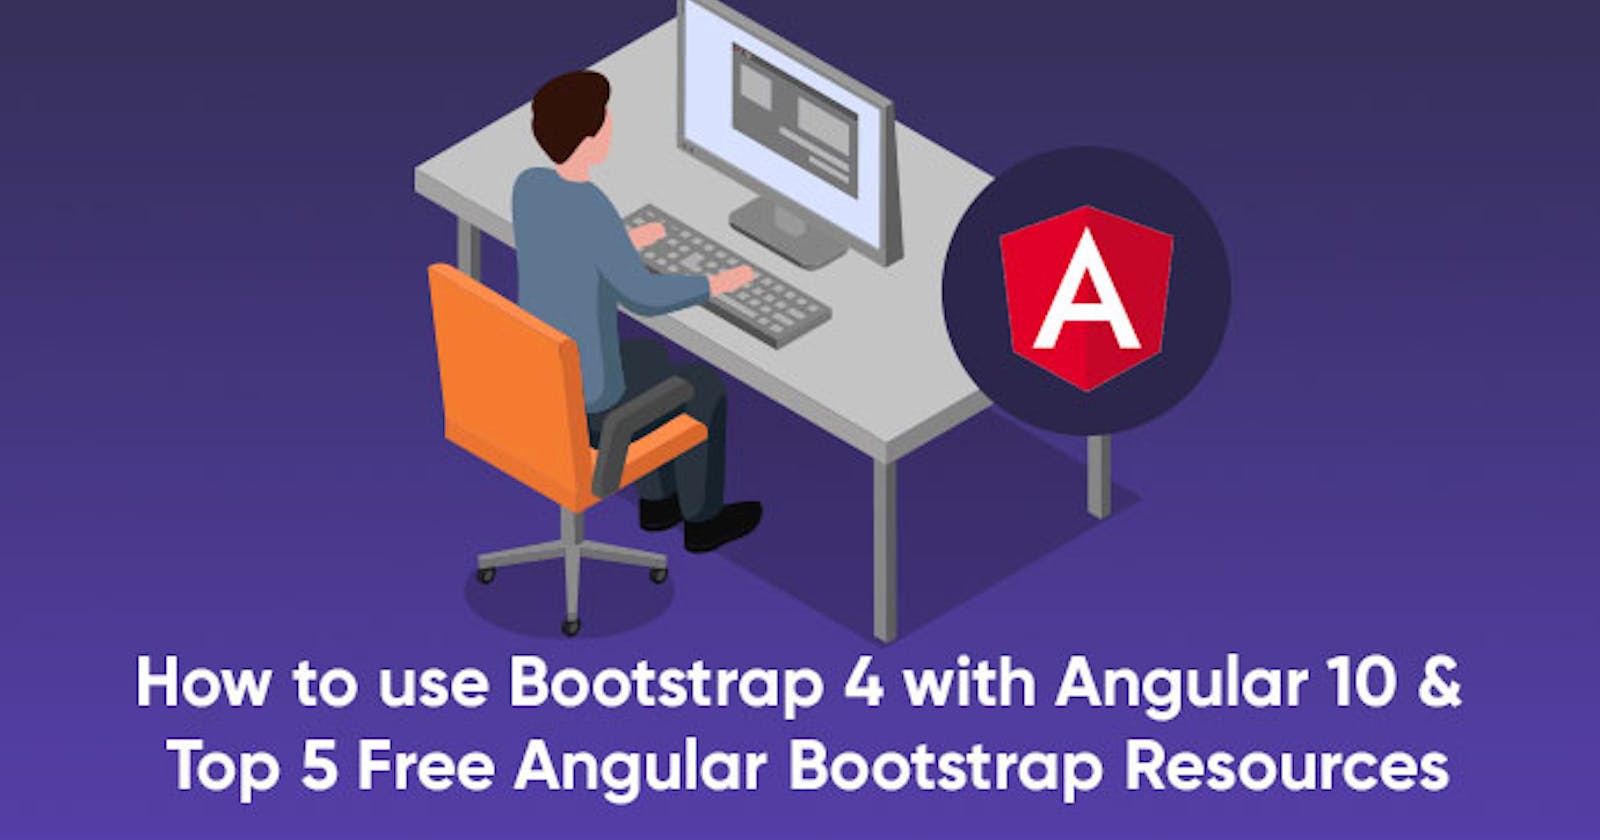 How to use Bootstrap 4 with Angular 10 & Top 5 Free Angular Bootstrap Resources